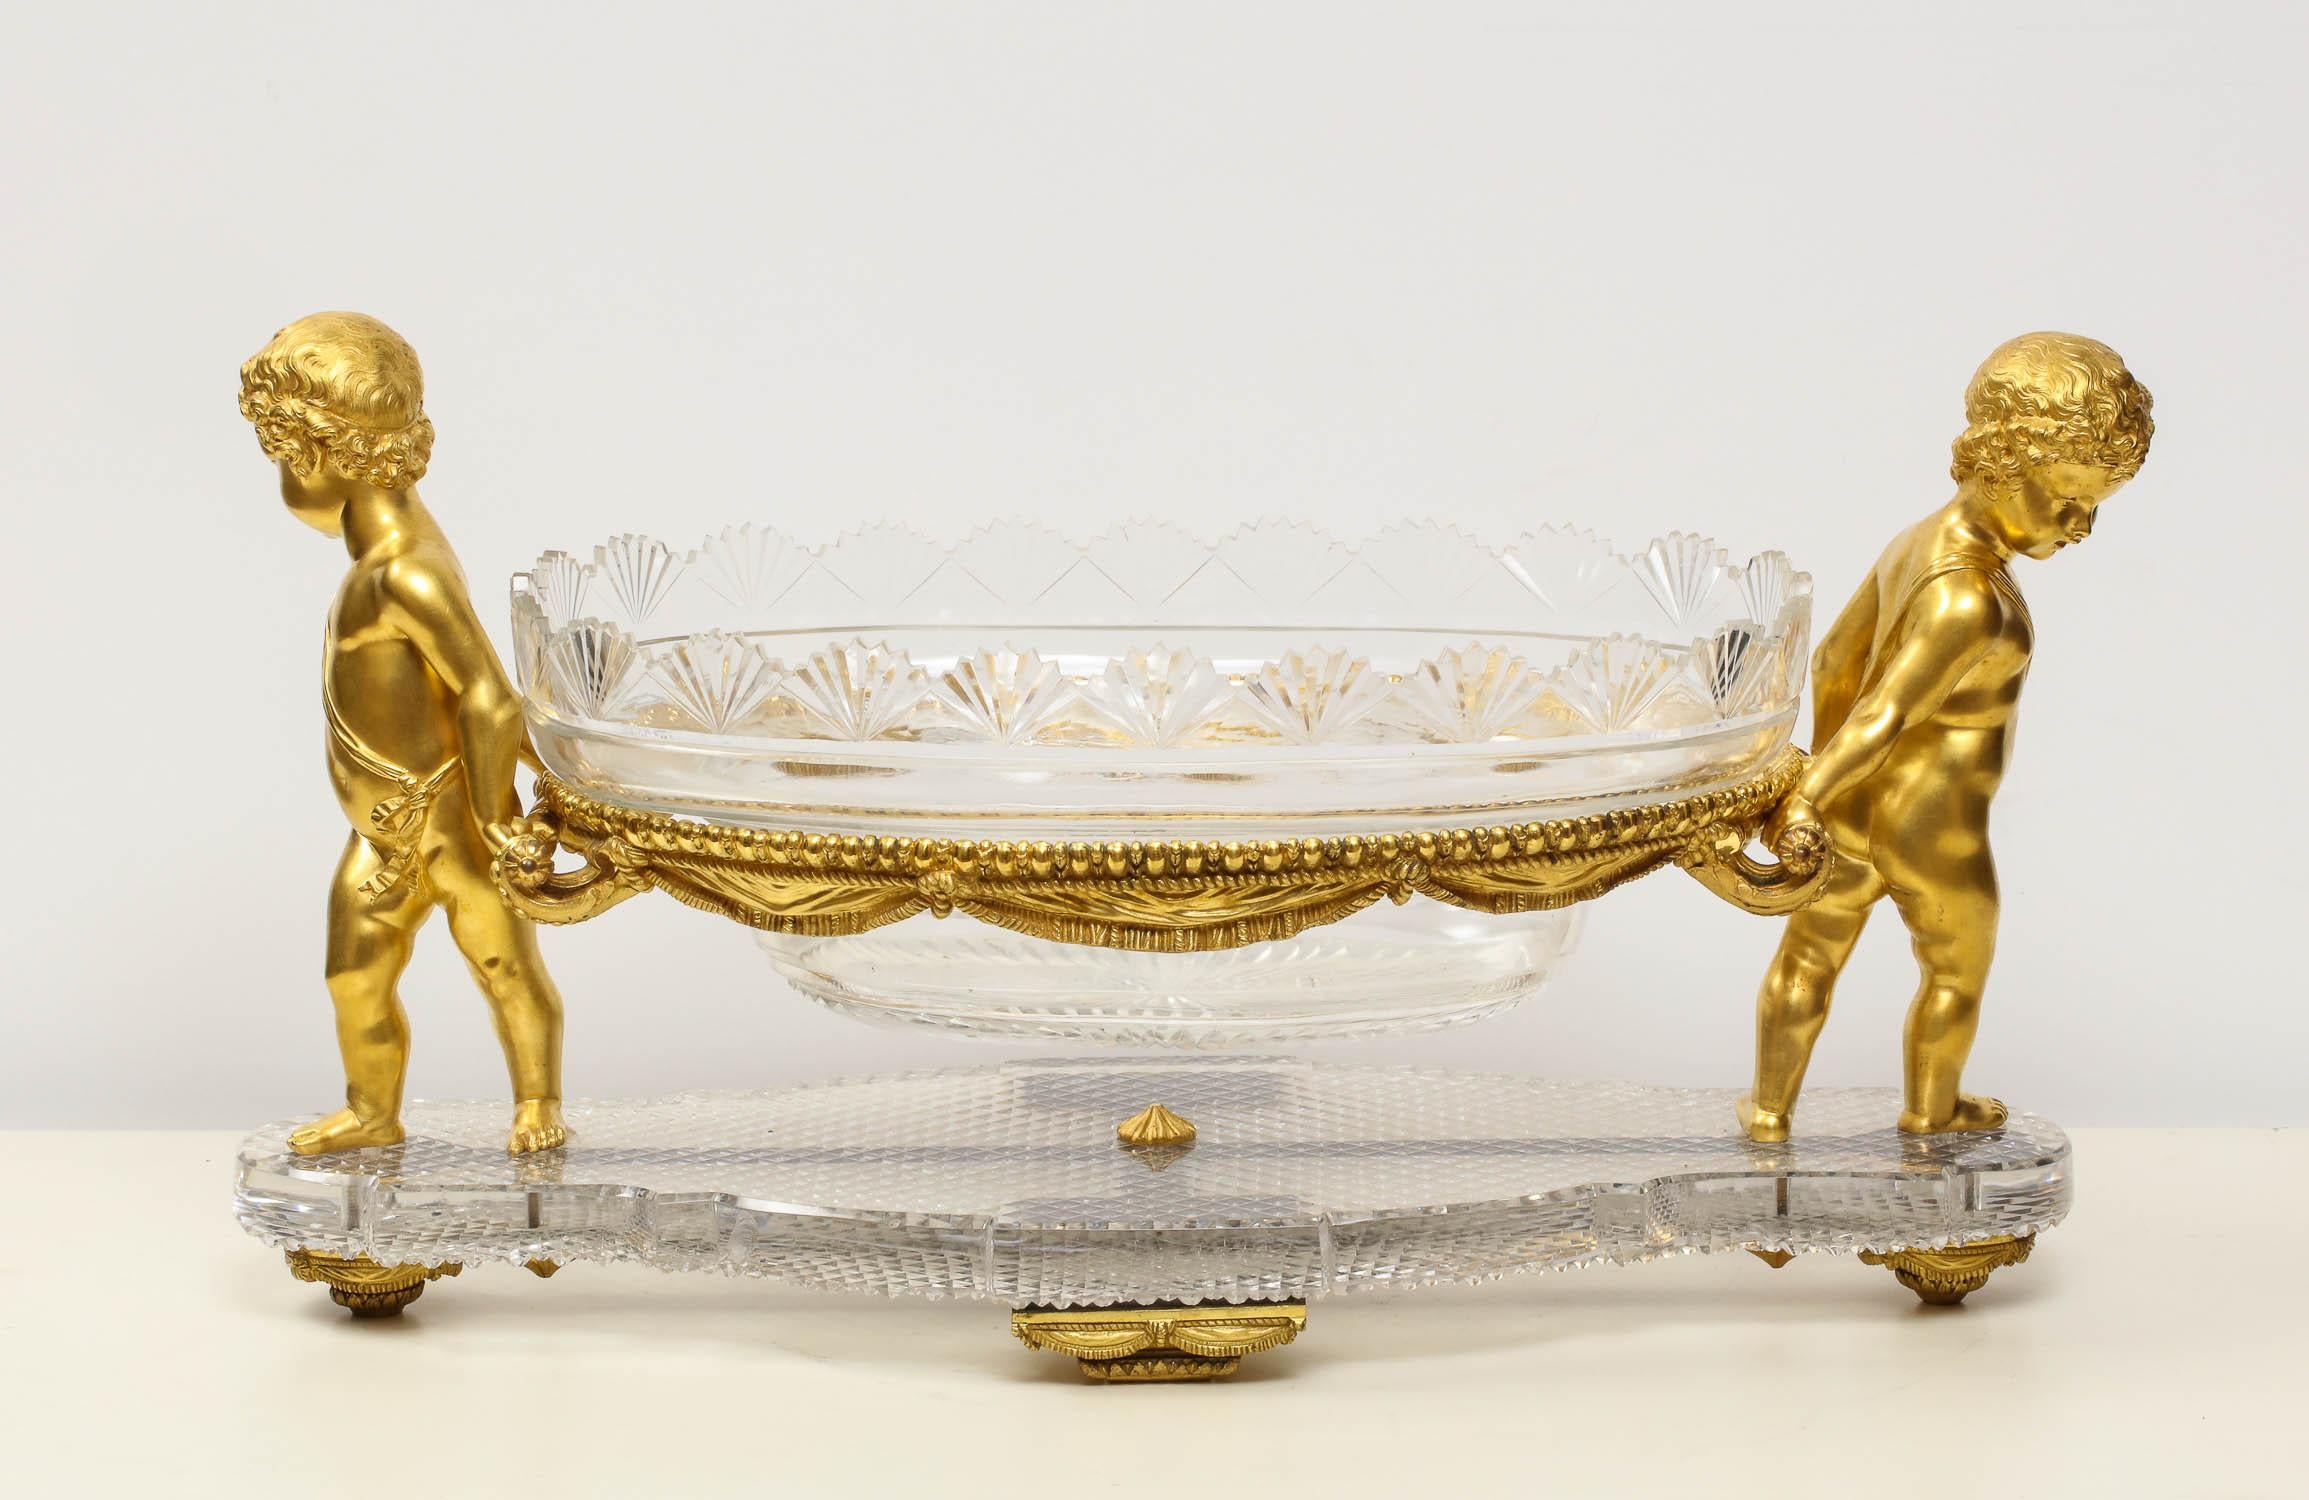 A French ormolu or bronze and cut-glass centerpiece by Baccarat Paris, circa 1870.

The center bowl supported on basket, flanked by two cherubs resting on ormolu supports, shaped cut-glass basket.

Very good condition. Ready to place.

Measures: